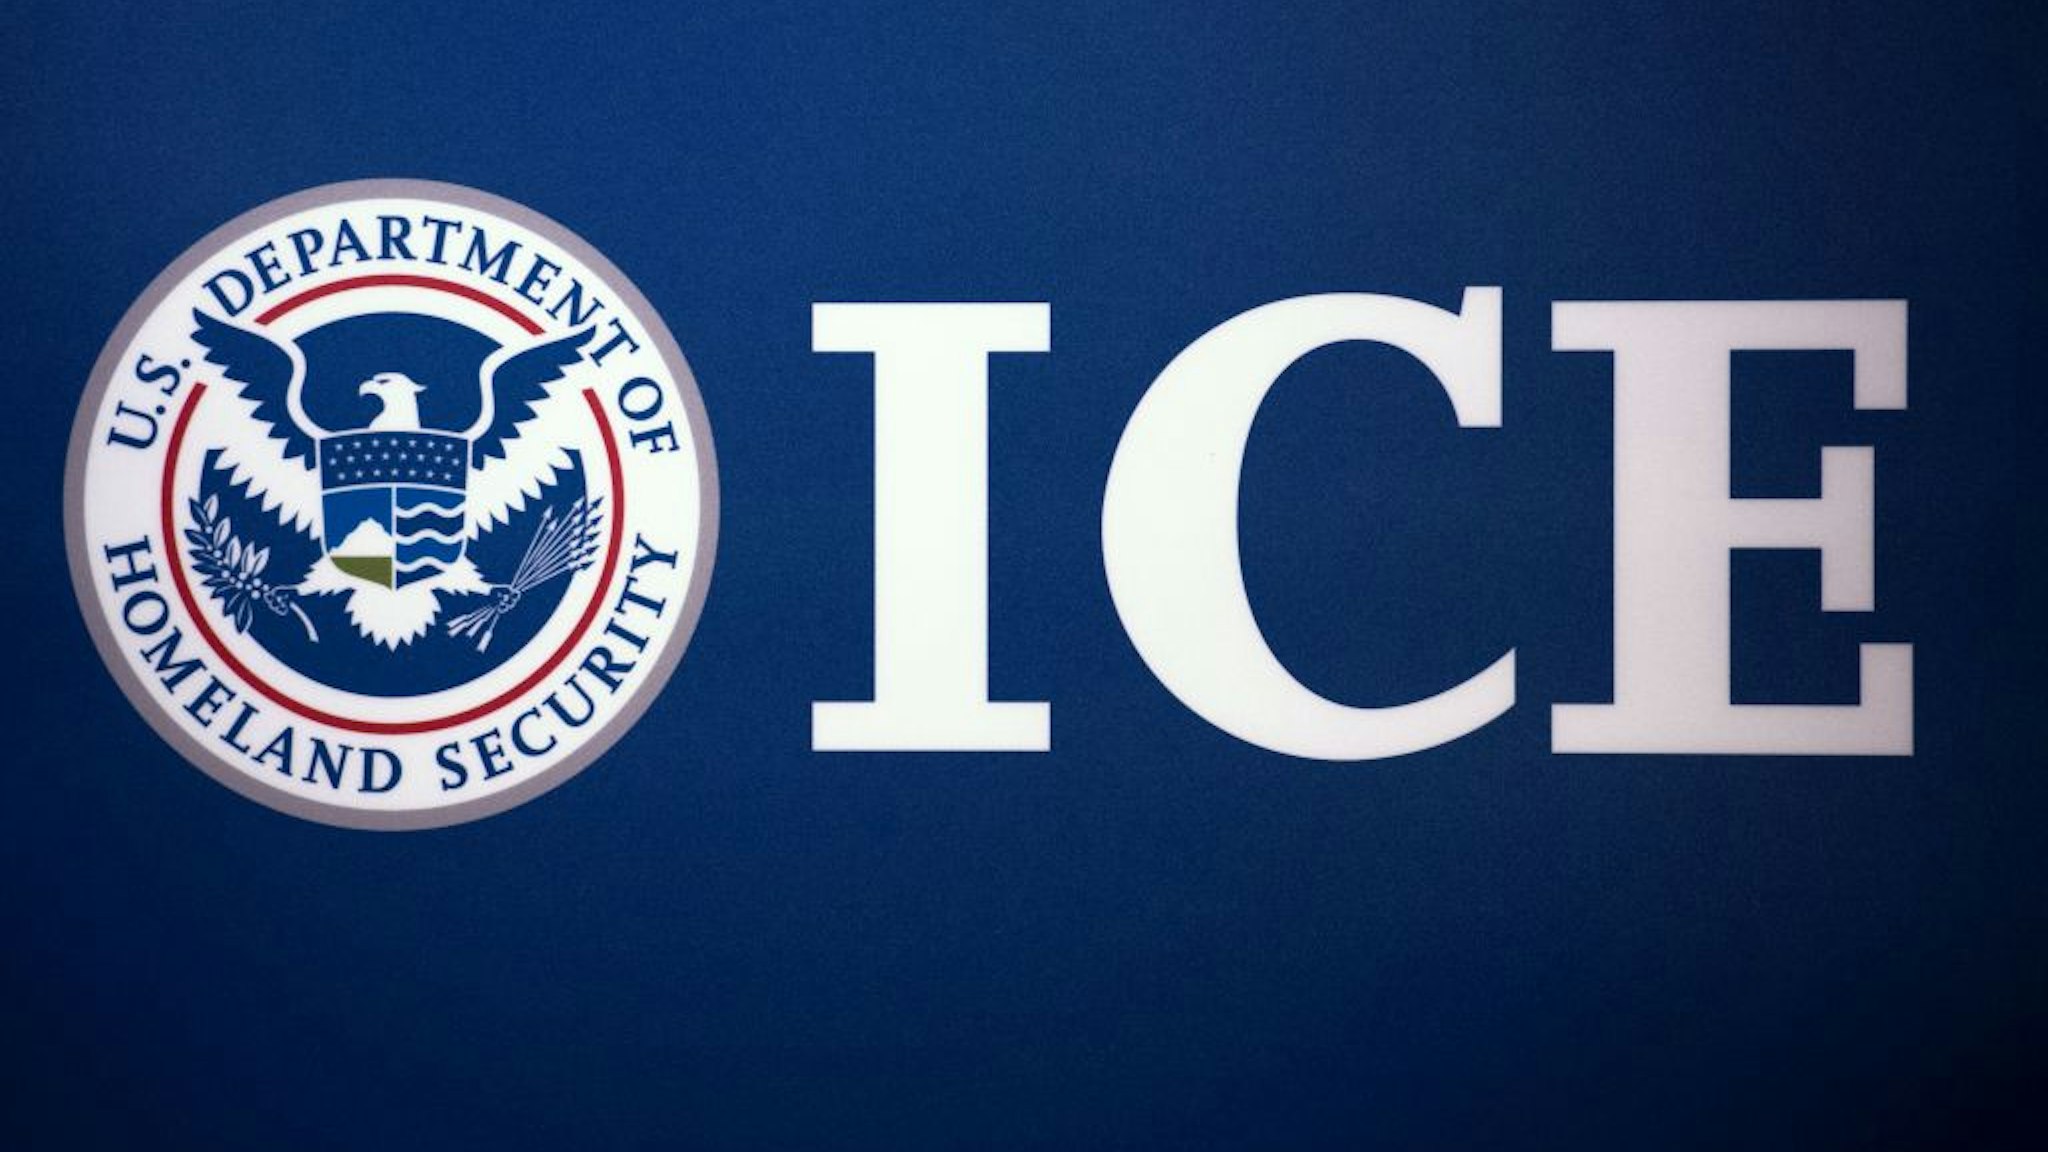 The Immigration and Customs Enforcement (ICE) seal is seen before a press conference discussing ongoing enforcement efforts to combat human smuggling along the Southwest border of the United States, July 22, 2014 at ICE headquarters in Washington, DC.